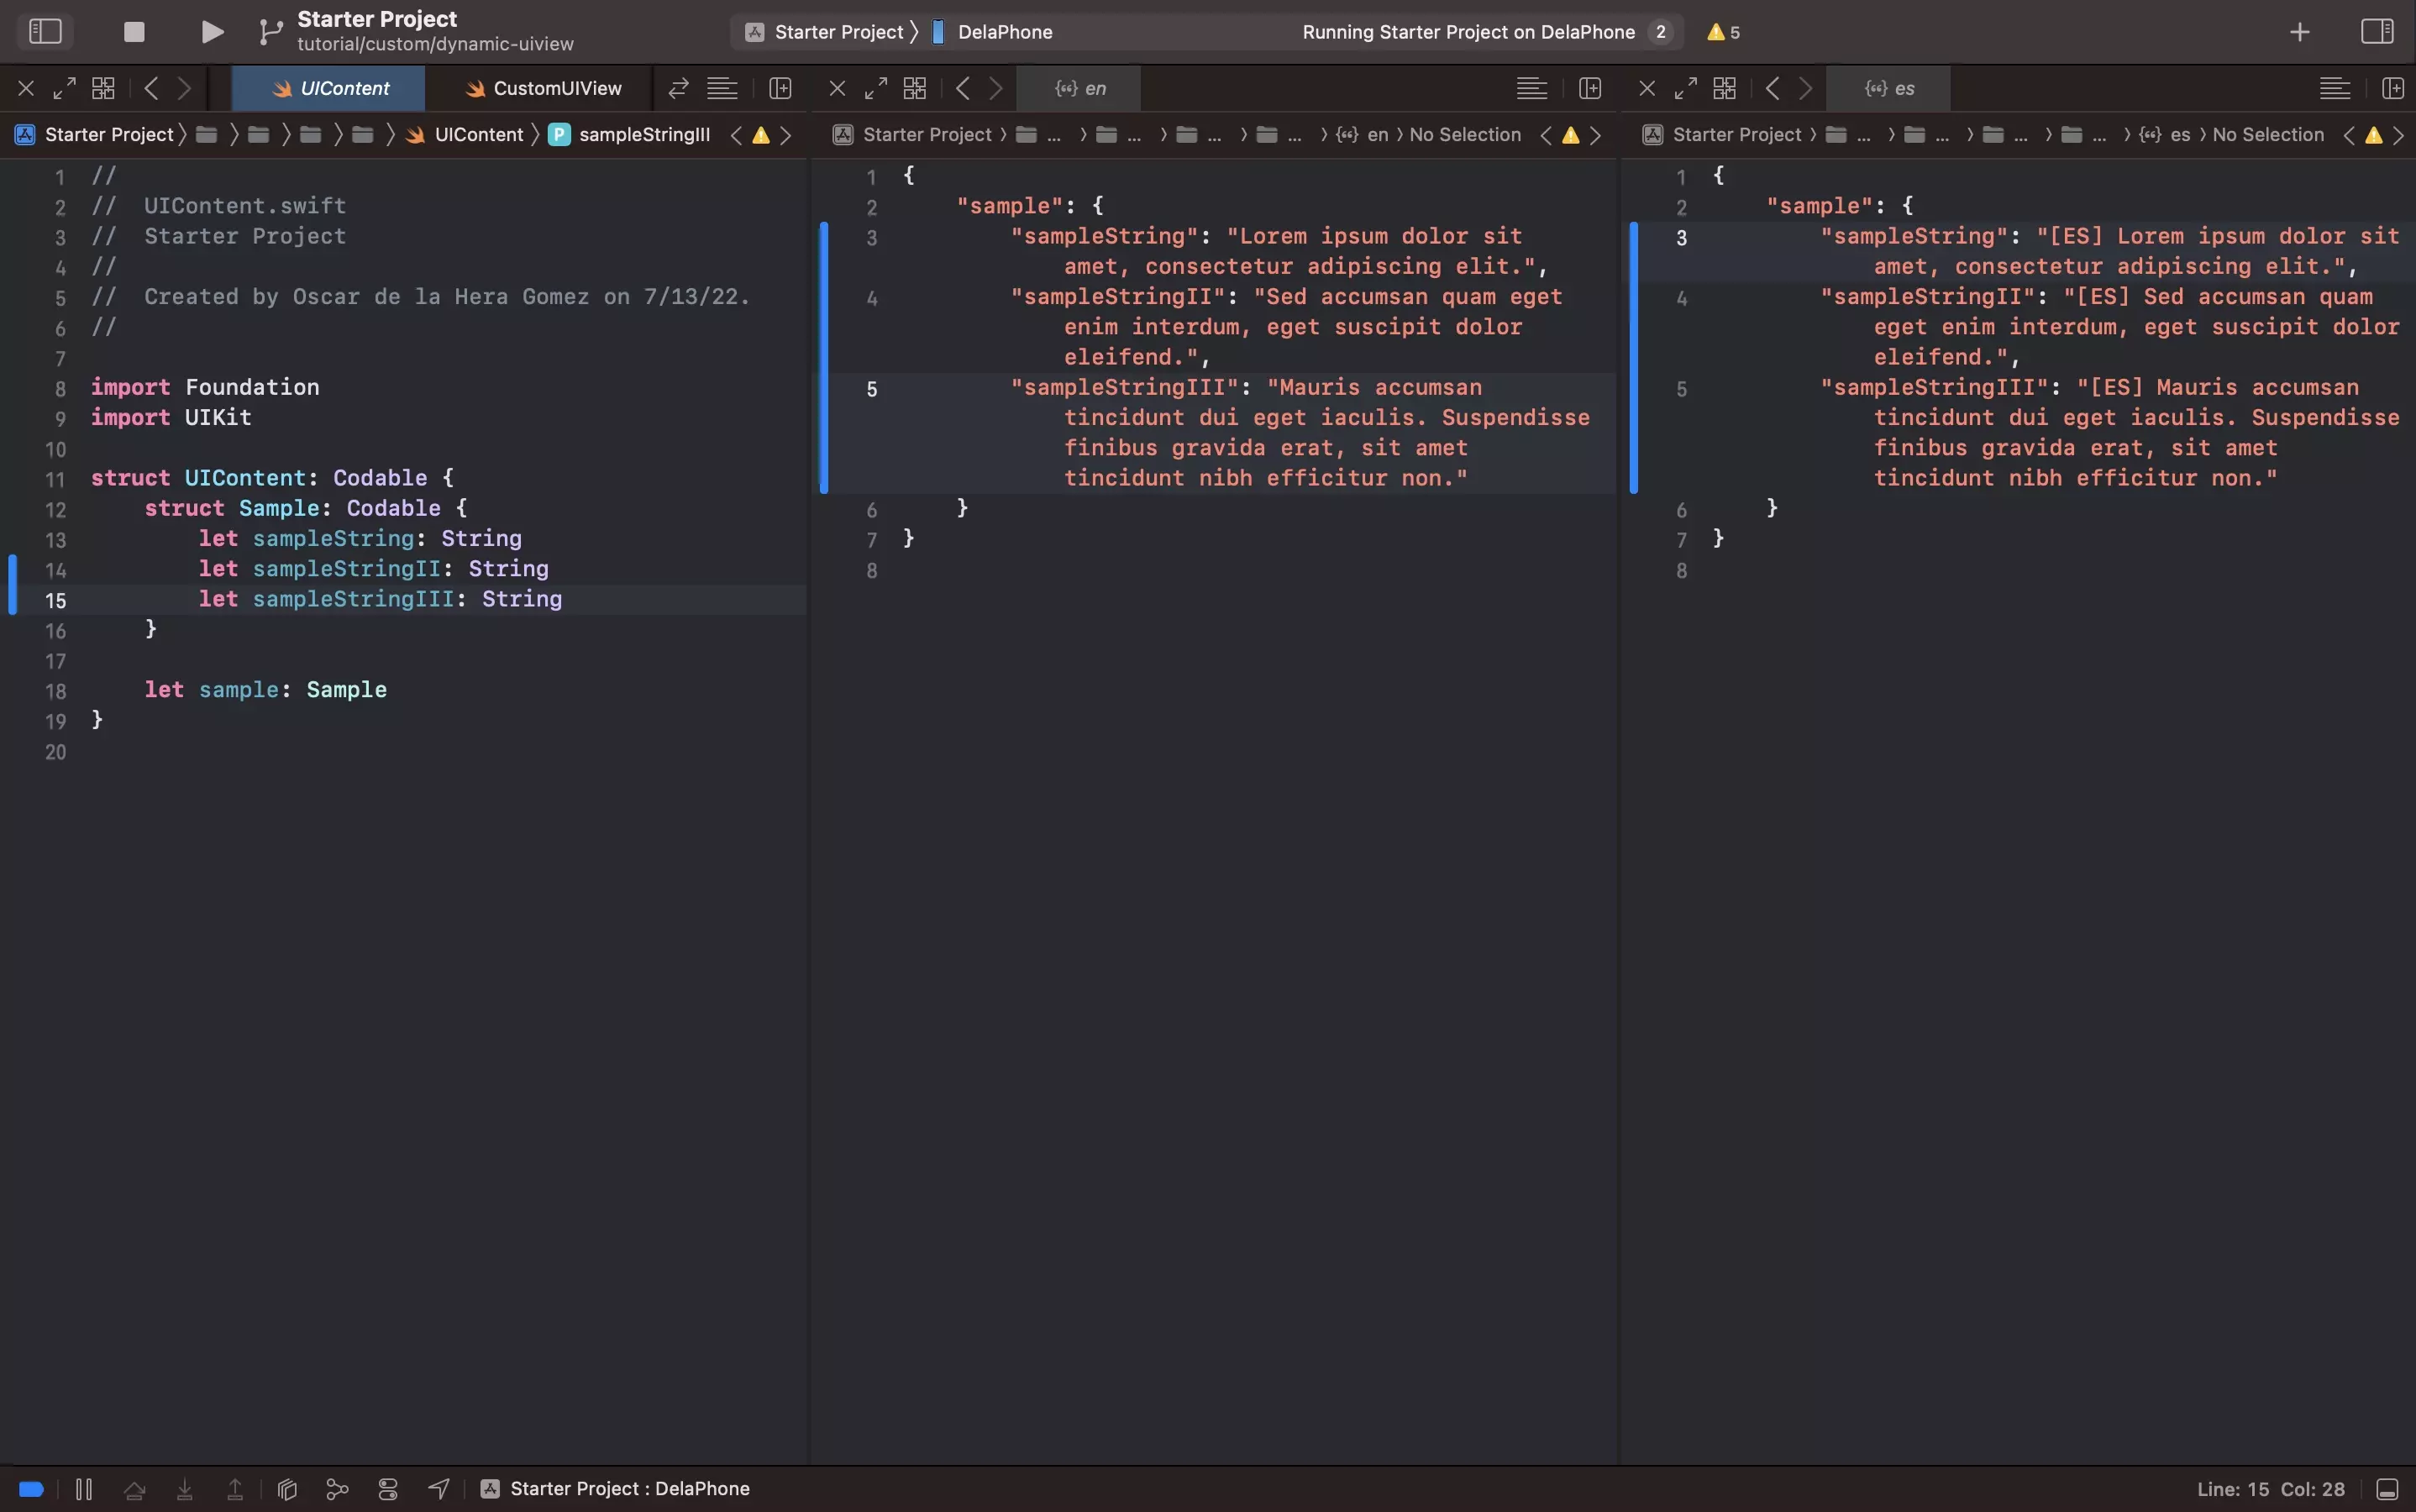 A screenshot of XCode showing the updates to the language content that are carried out in this step.